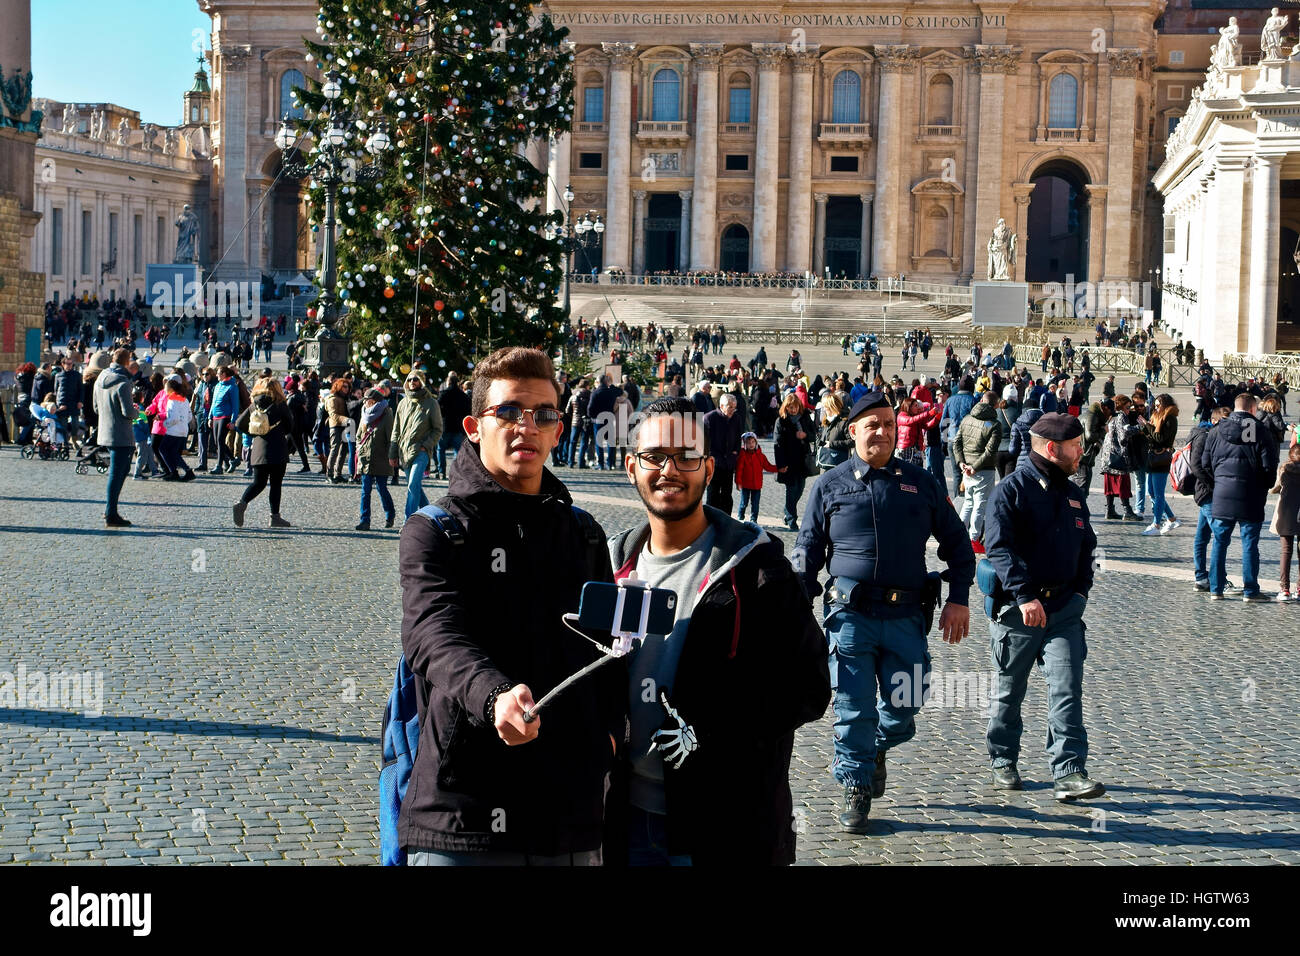 Two friends taking saelfie using smartphone with stick at Saint Peter's Square (Piazza San Pietro) Vatican City, on a winter sunny day. Rome Christmas Stock Photo